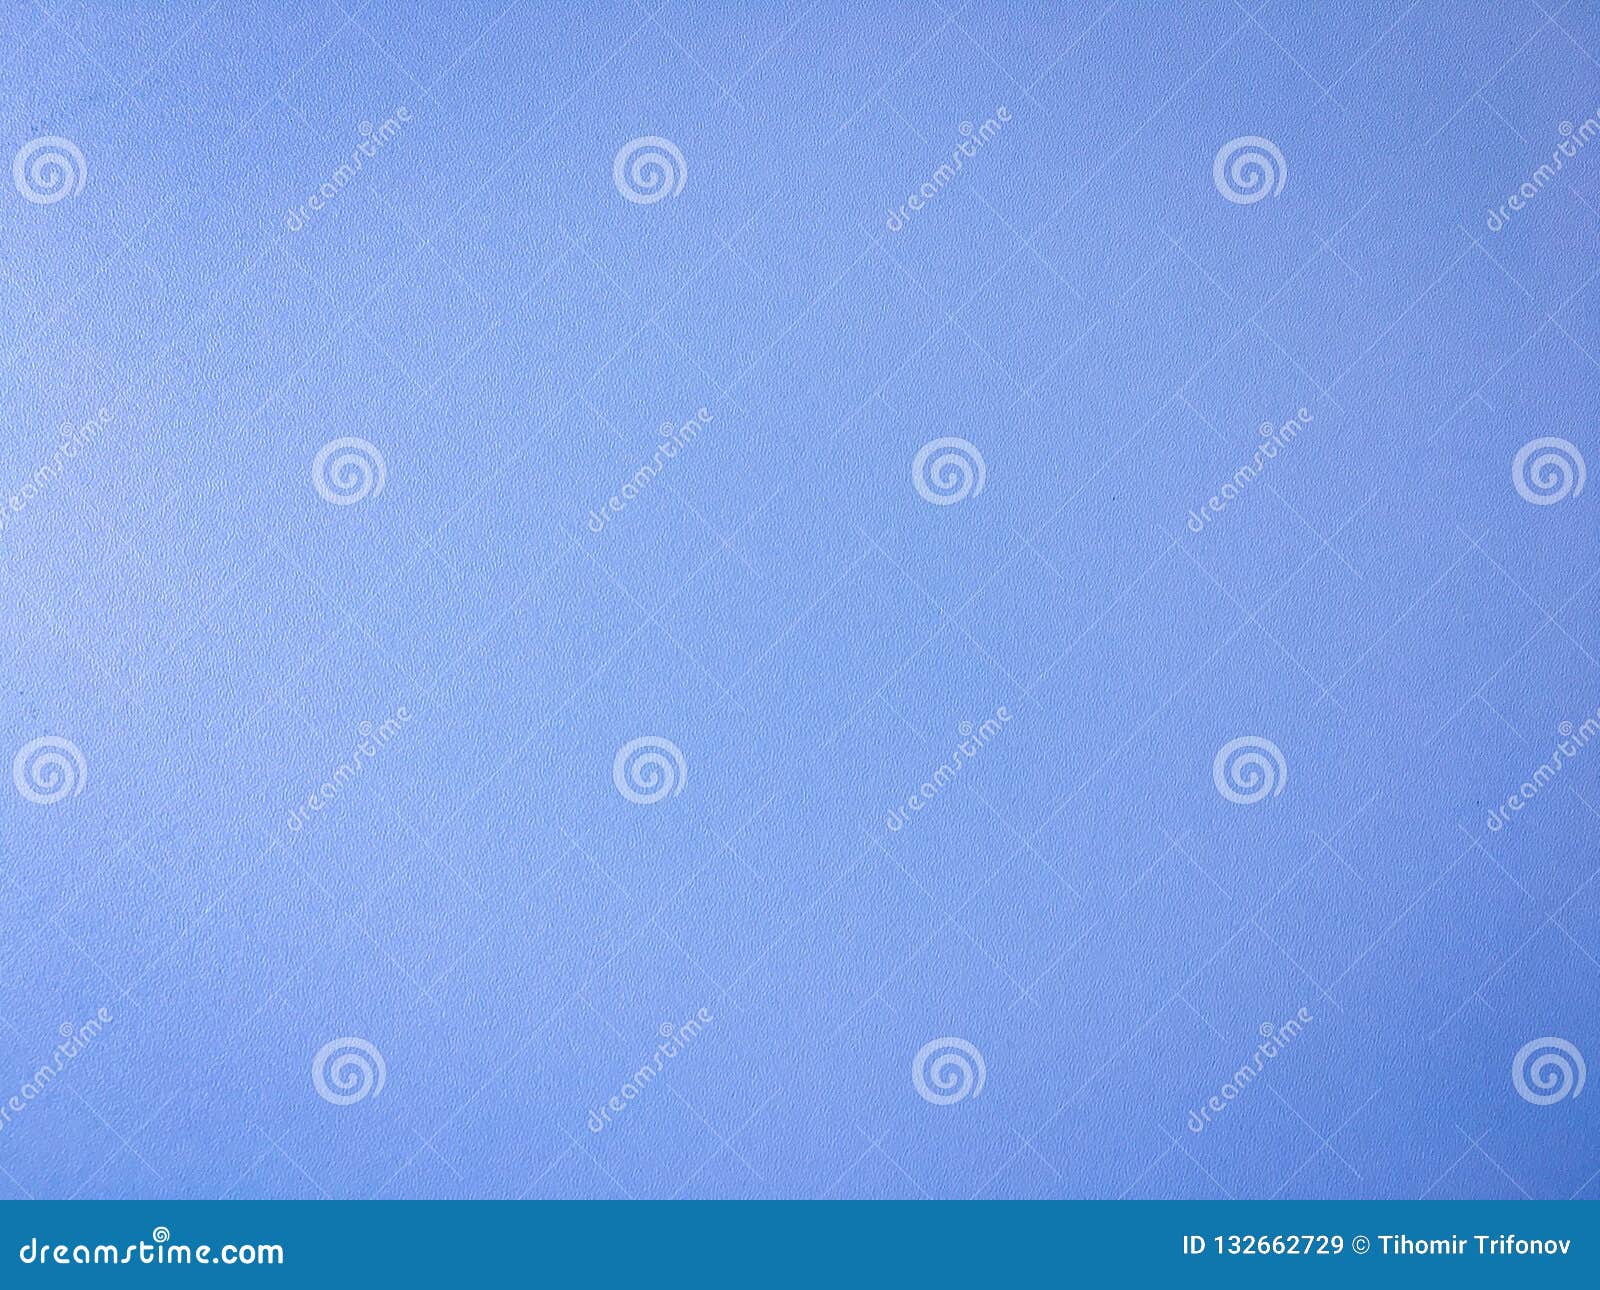 Blue Wood Texture. Light Wood Texture Background Stock Image - Image of ...